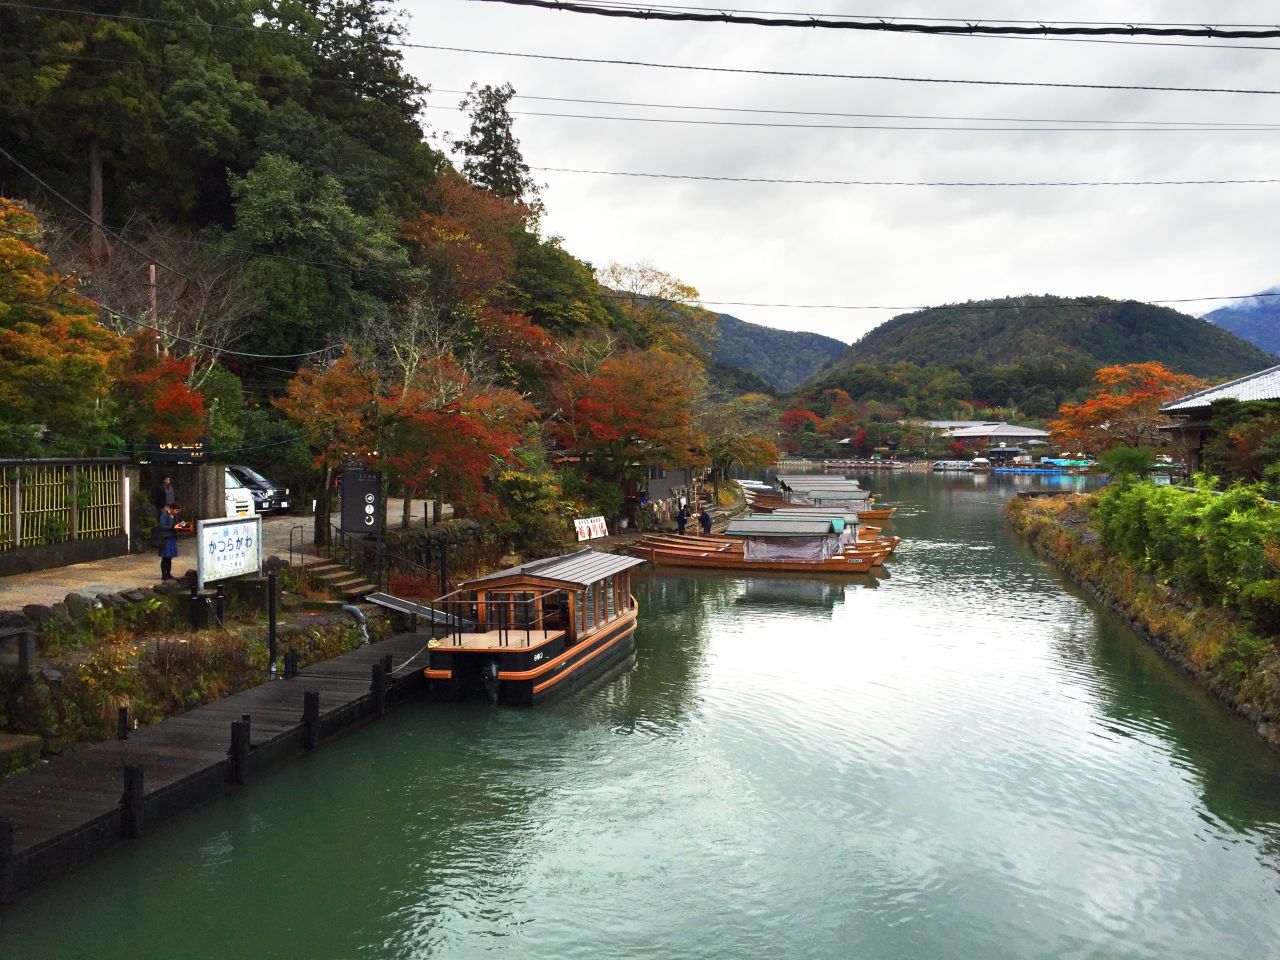 The Hoshinoya ryokan, nestled on the banks of Kyoto's Katsura river, can only be accessed by riverboat or a footpath that takes 20 minutes to traverse. 